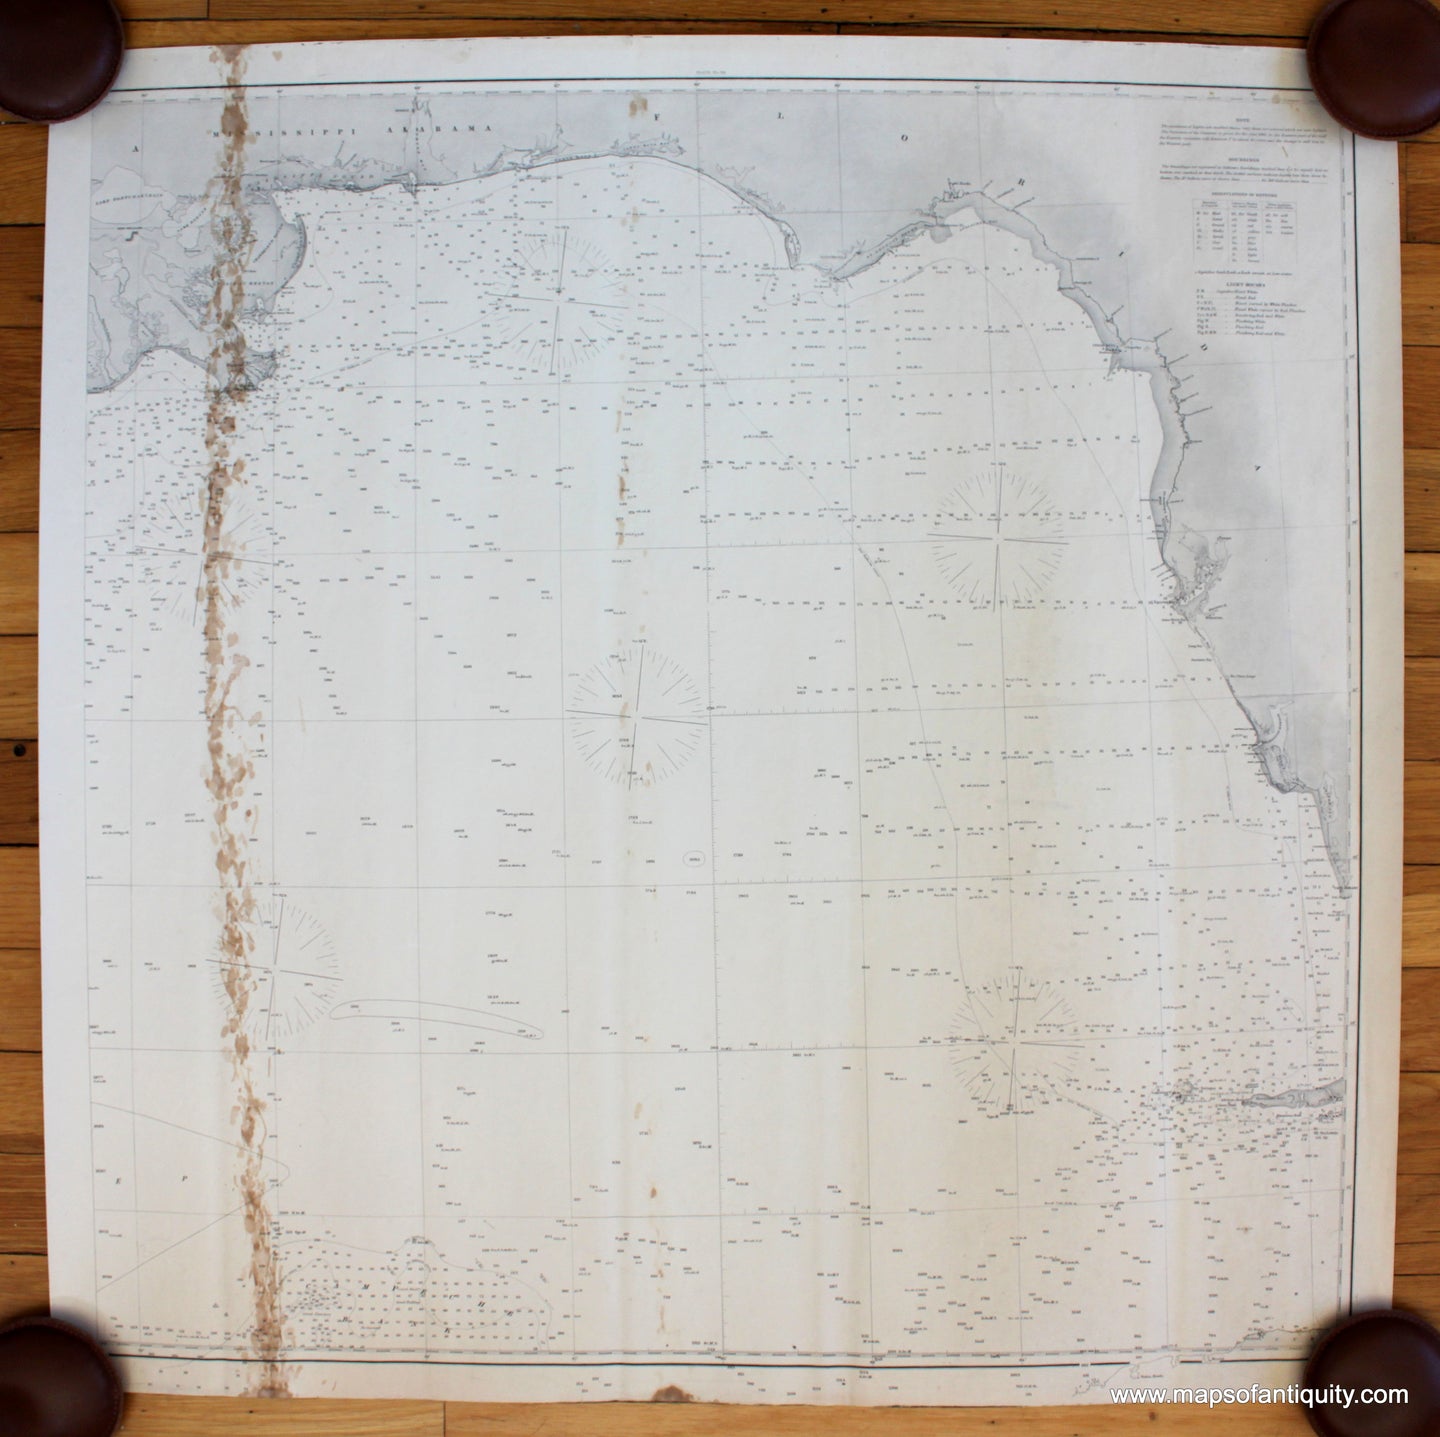 Antique-nautical-chart-restrike-Southern-Coast-United-States-Gulf-of-Mexico-New-Orleans-Key-West-USC&GS-20th-Century-Maps-of-Antiquity